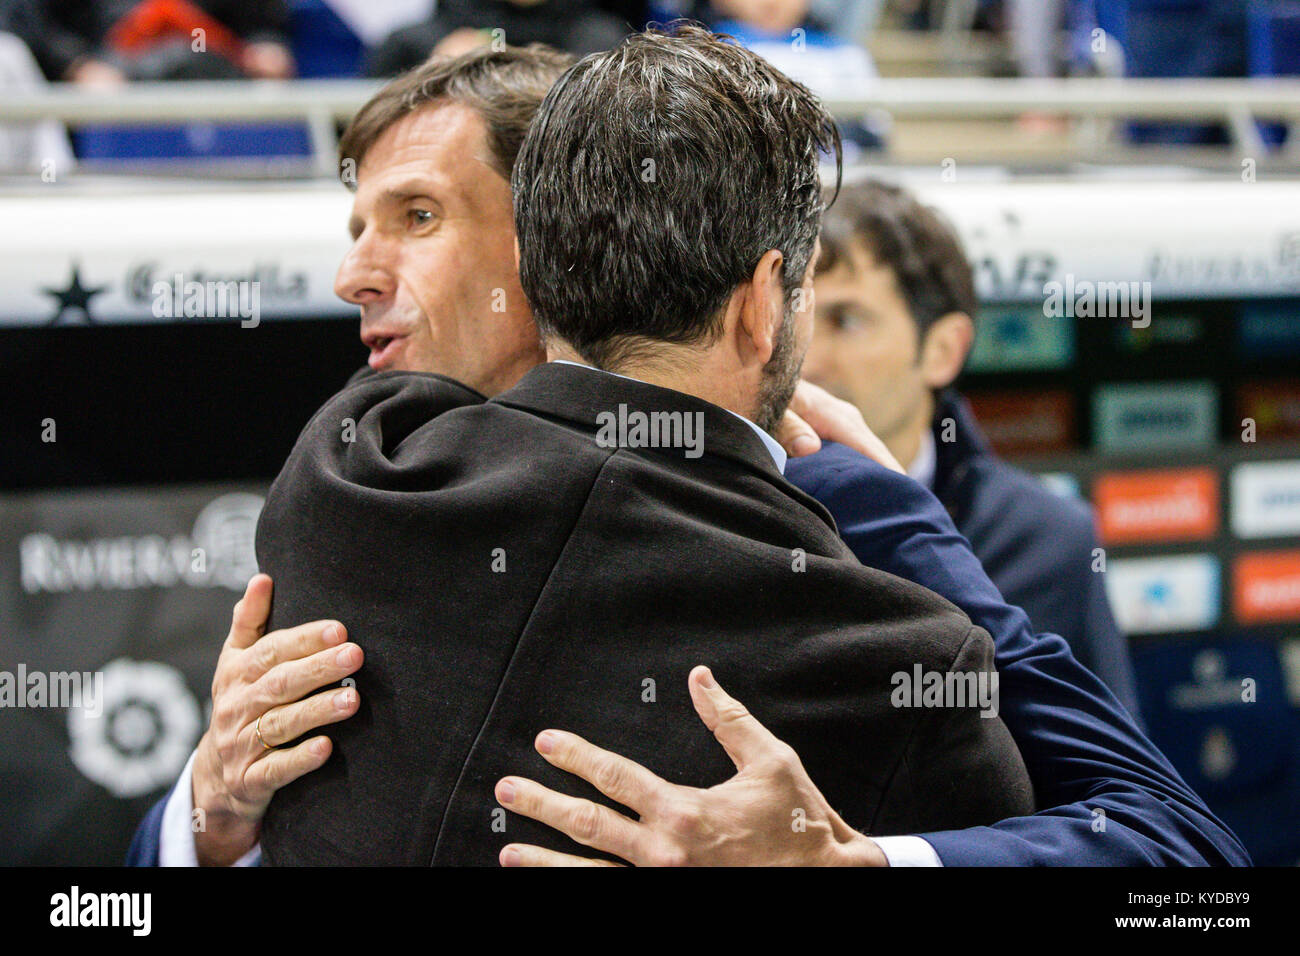 RCD Espanyol coach Quique Sanchez Flores and Athletic Club coach Jose Angel 'Kuko' Ziganda during the match between RCD Espanyol v Athletic Club, for the round 19 of the Liga Santander, played at RCDE Stadium on 14th January 2018 in Barcelona, Spain. Stock Photo